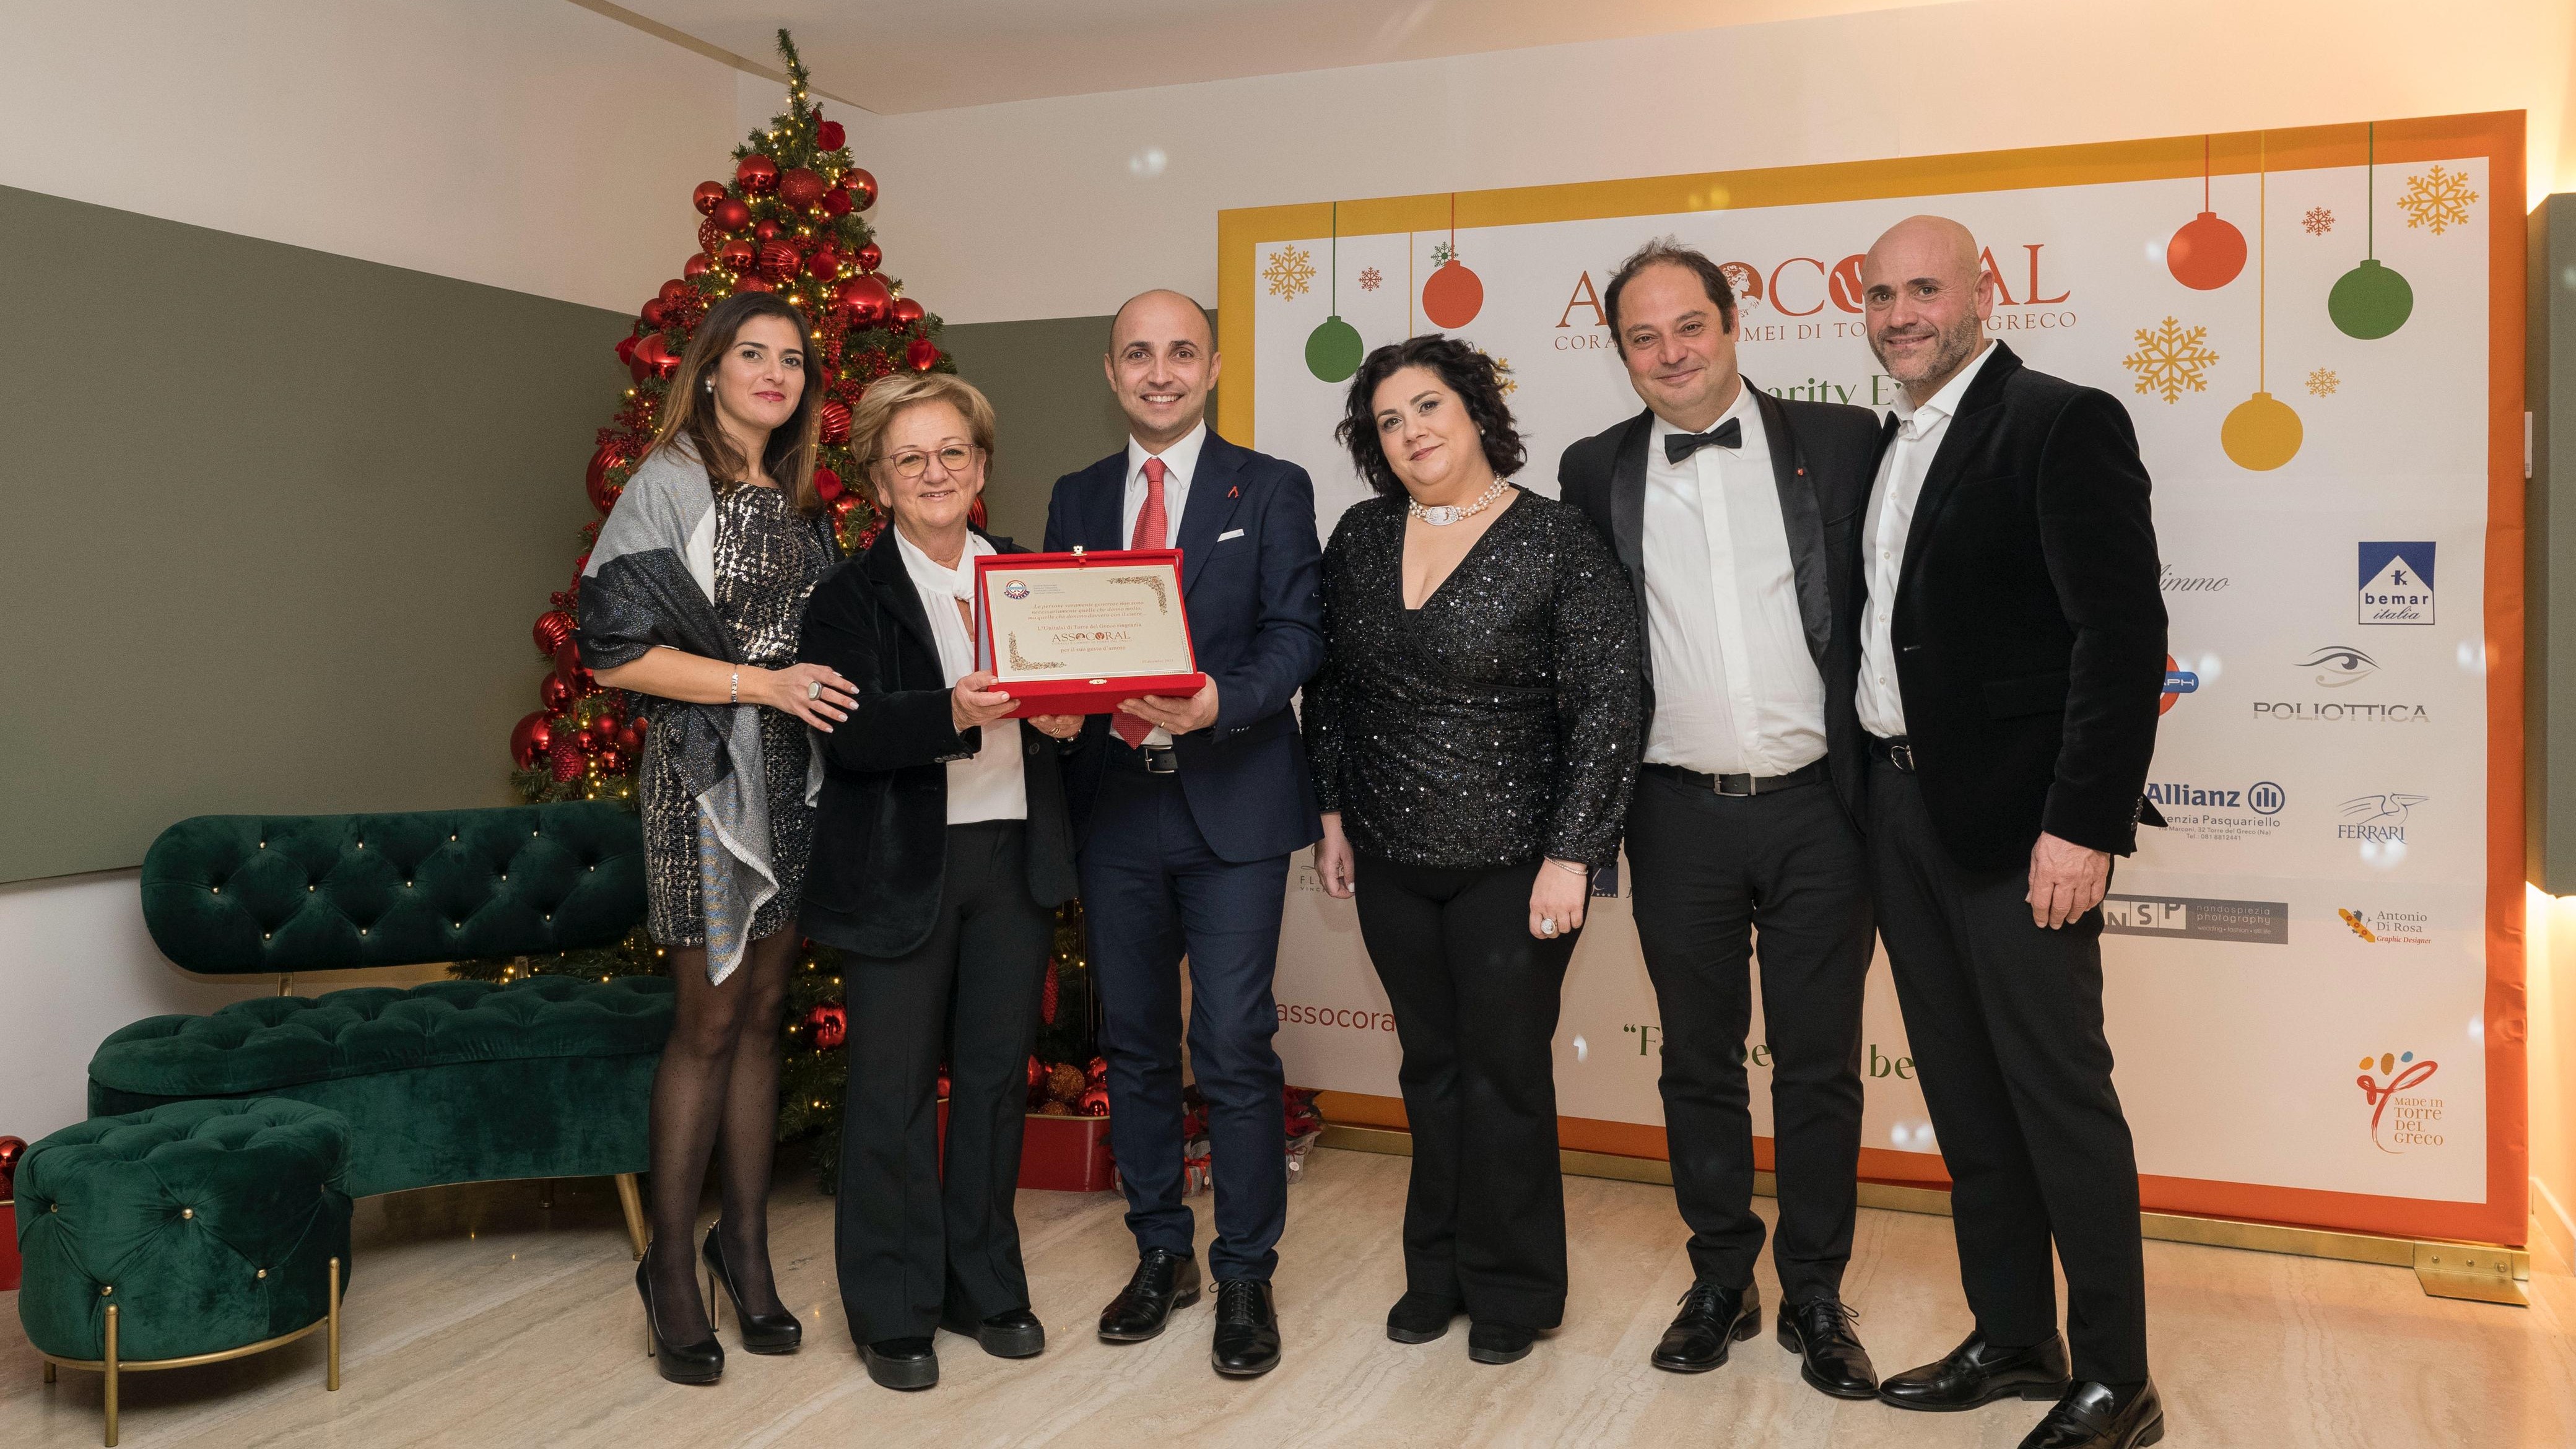 torre greco evento beneficenza natale assocoral